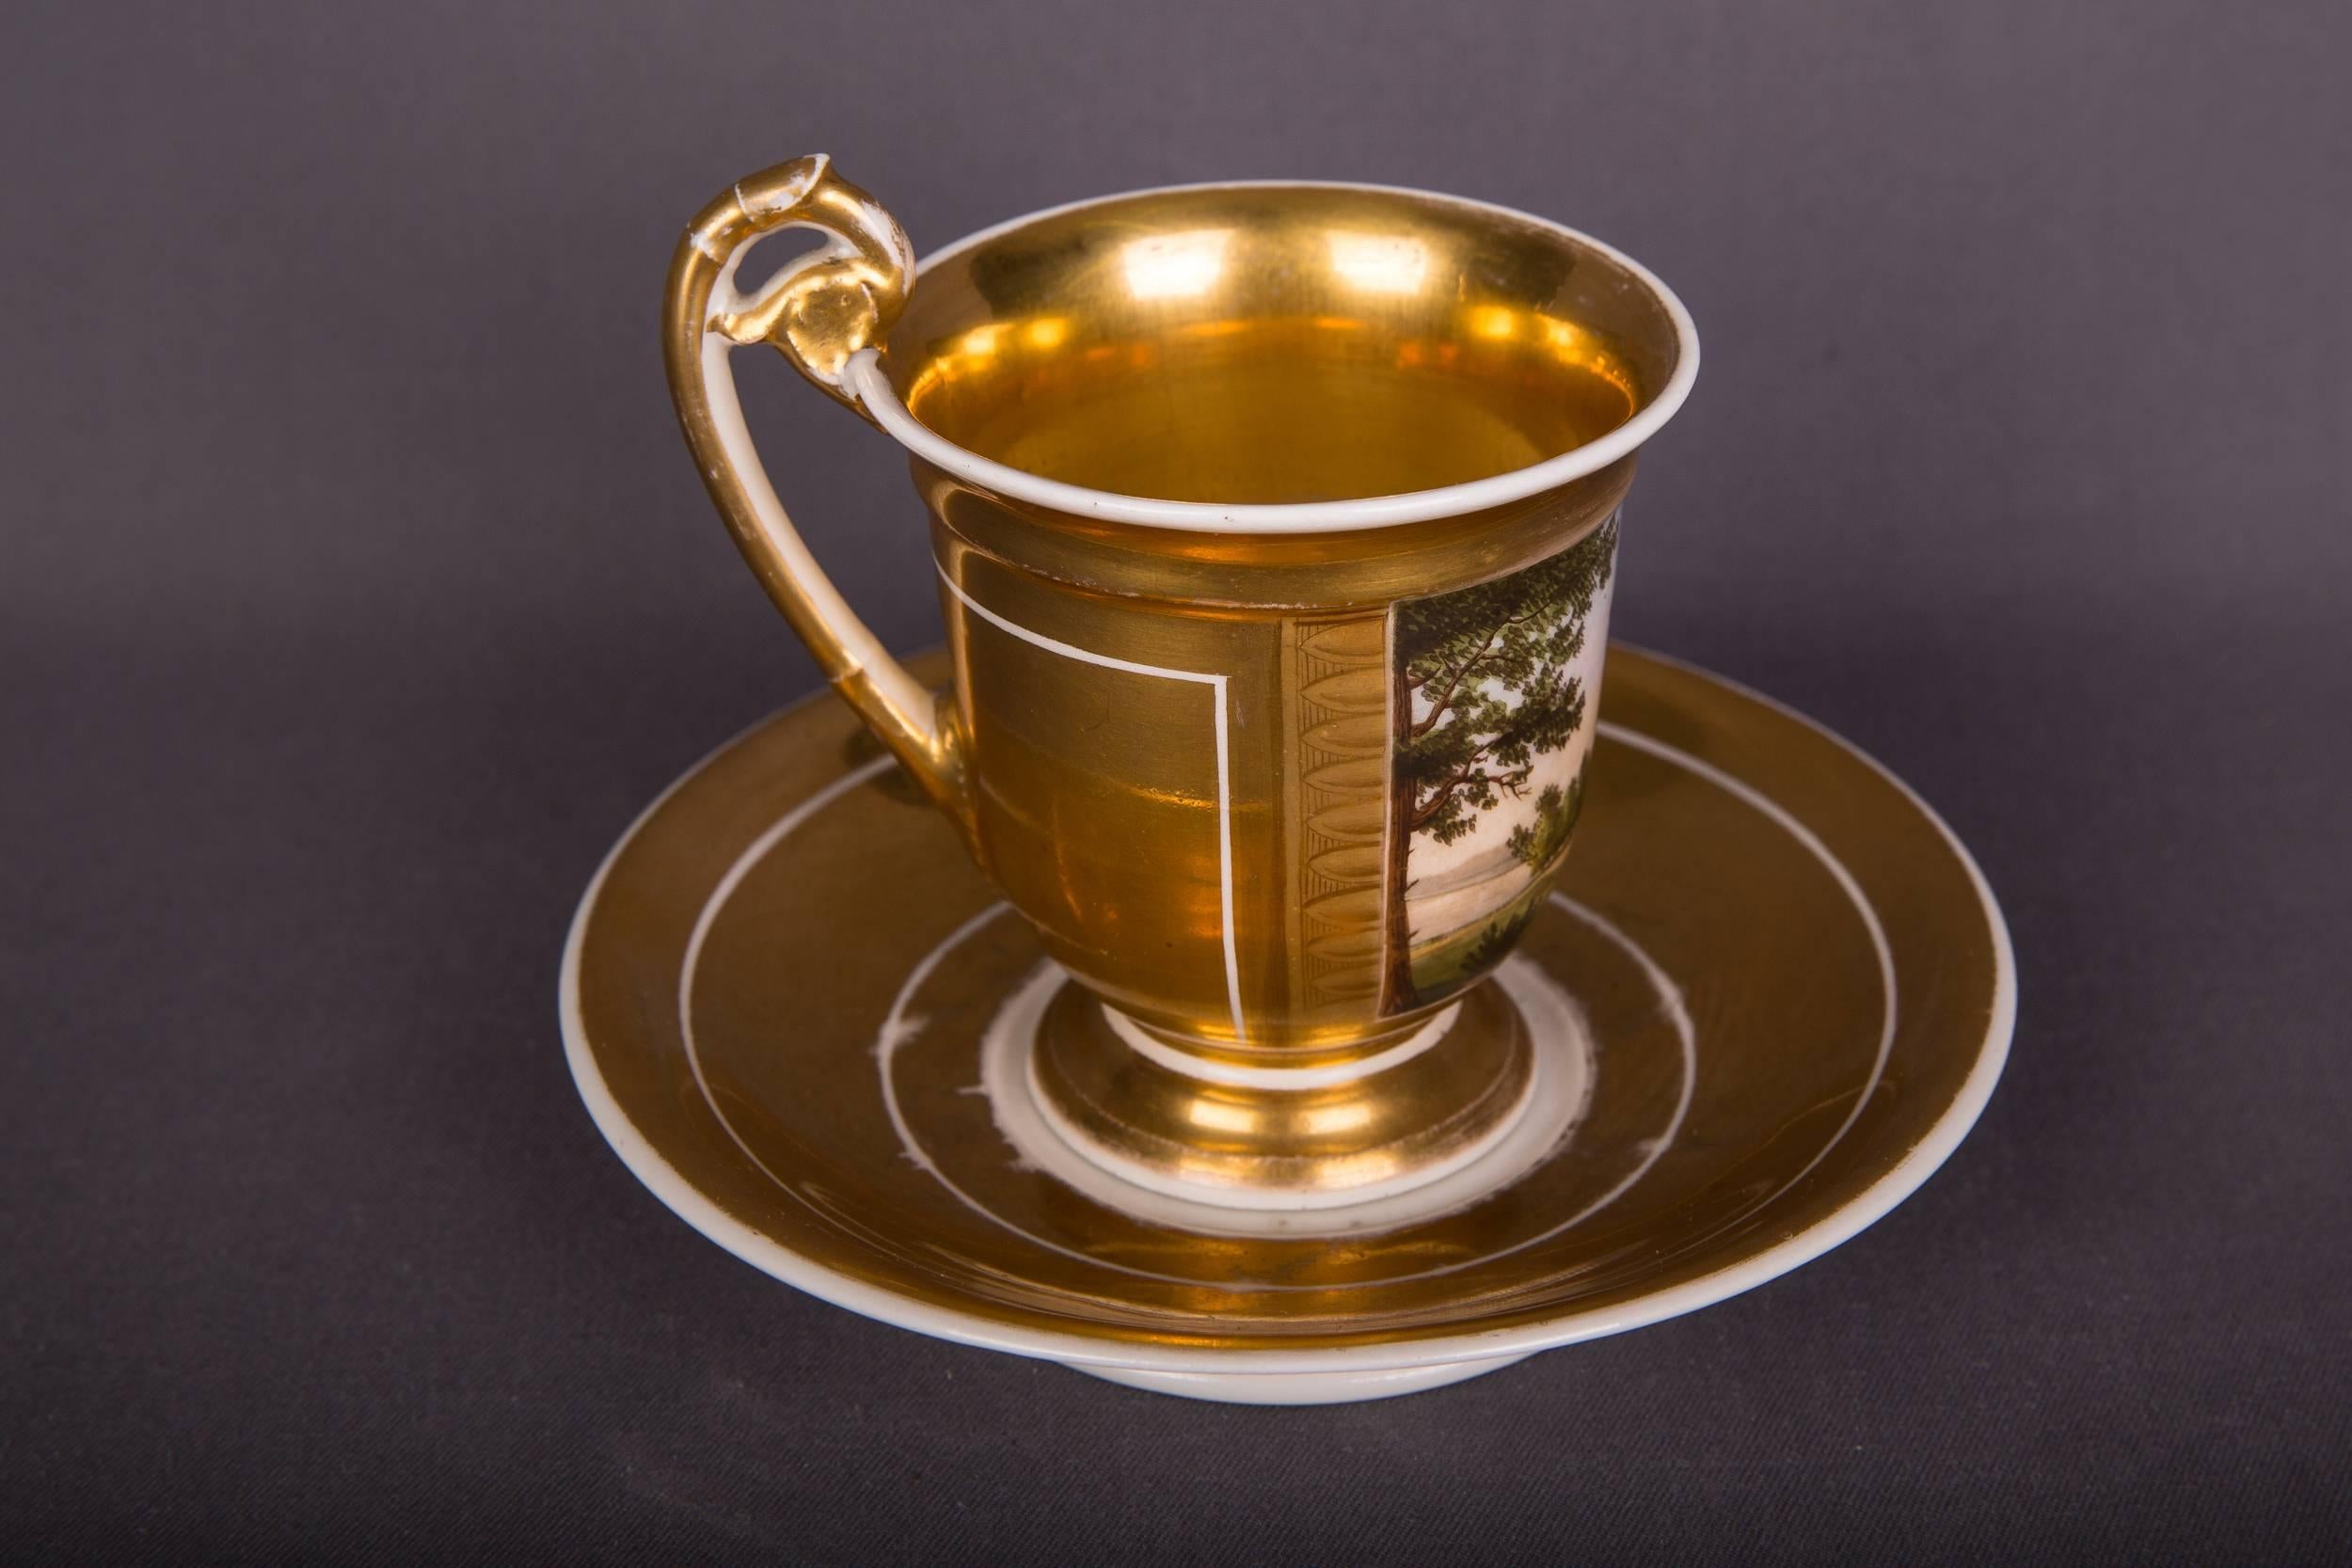 Very elaborate and finely painted.

Very fine finish.

The place settings are not damaged and are in a good historical condition, only minimal gold abrasion.

Dimensions:
Cup (height 10 cm diameter 7.5 cm)
Undercup (height 3 cm diameter 14.5